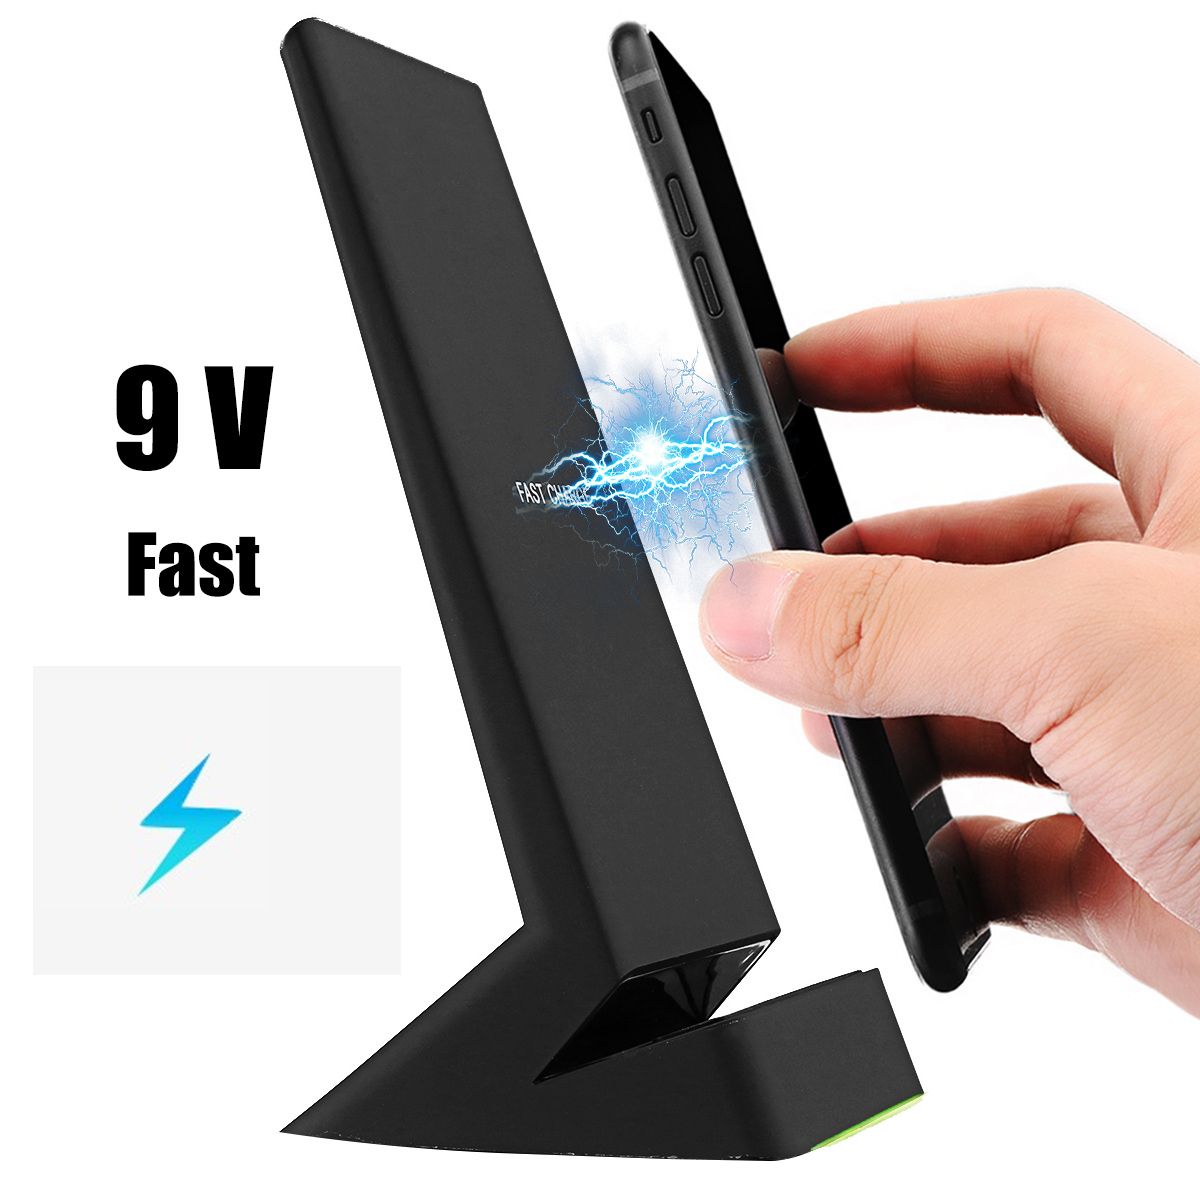 Bakeey-Qi-Wireless-Fast-Charger-For-iPhone-X-8-8Plus-Samsung-S8-S7-Edge-Note-8-1223659